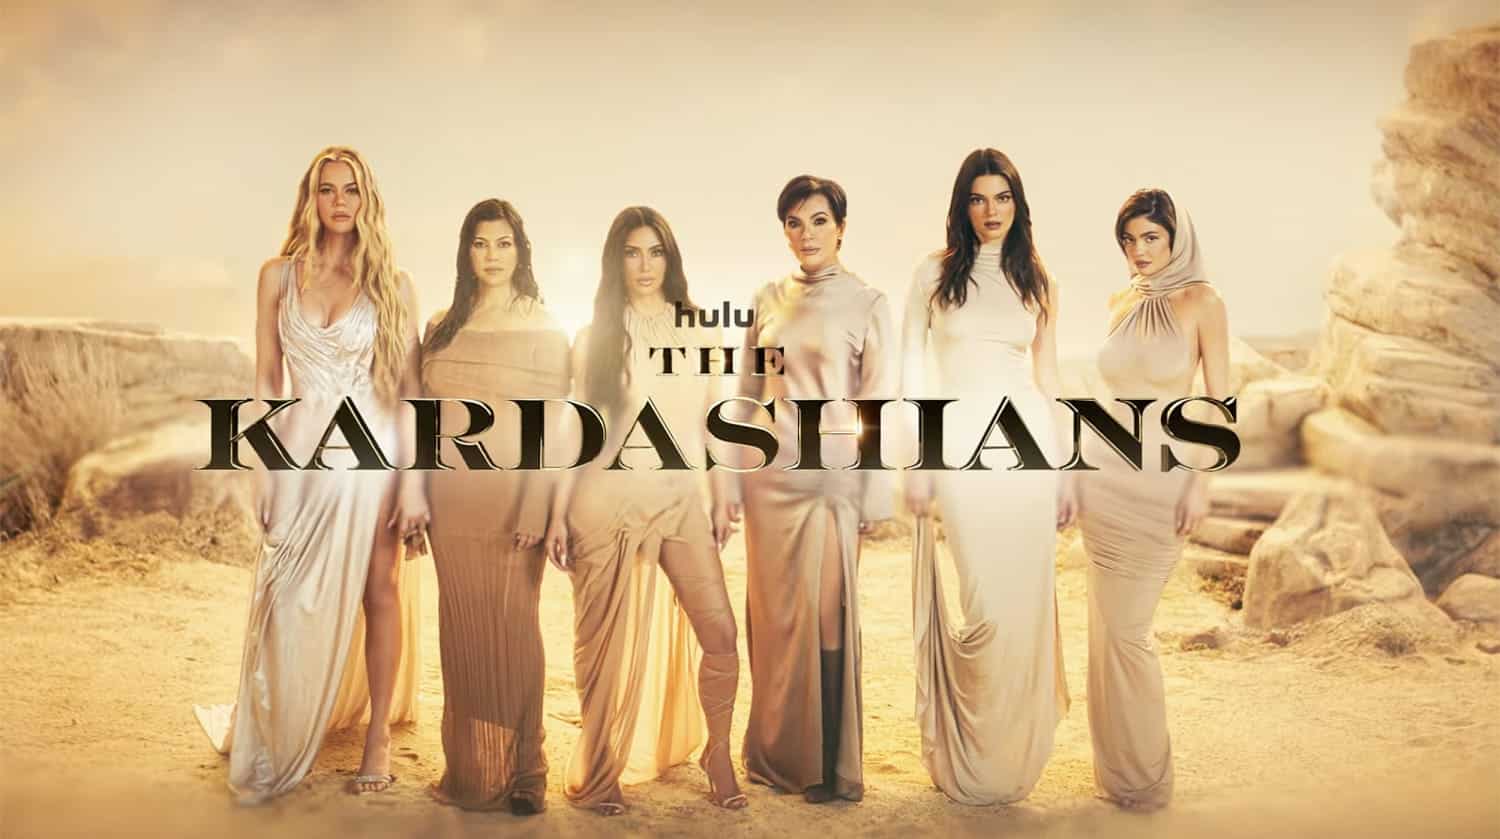 Release Date Revealed: Here's When To Keep Up With “The Kardashians”